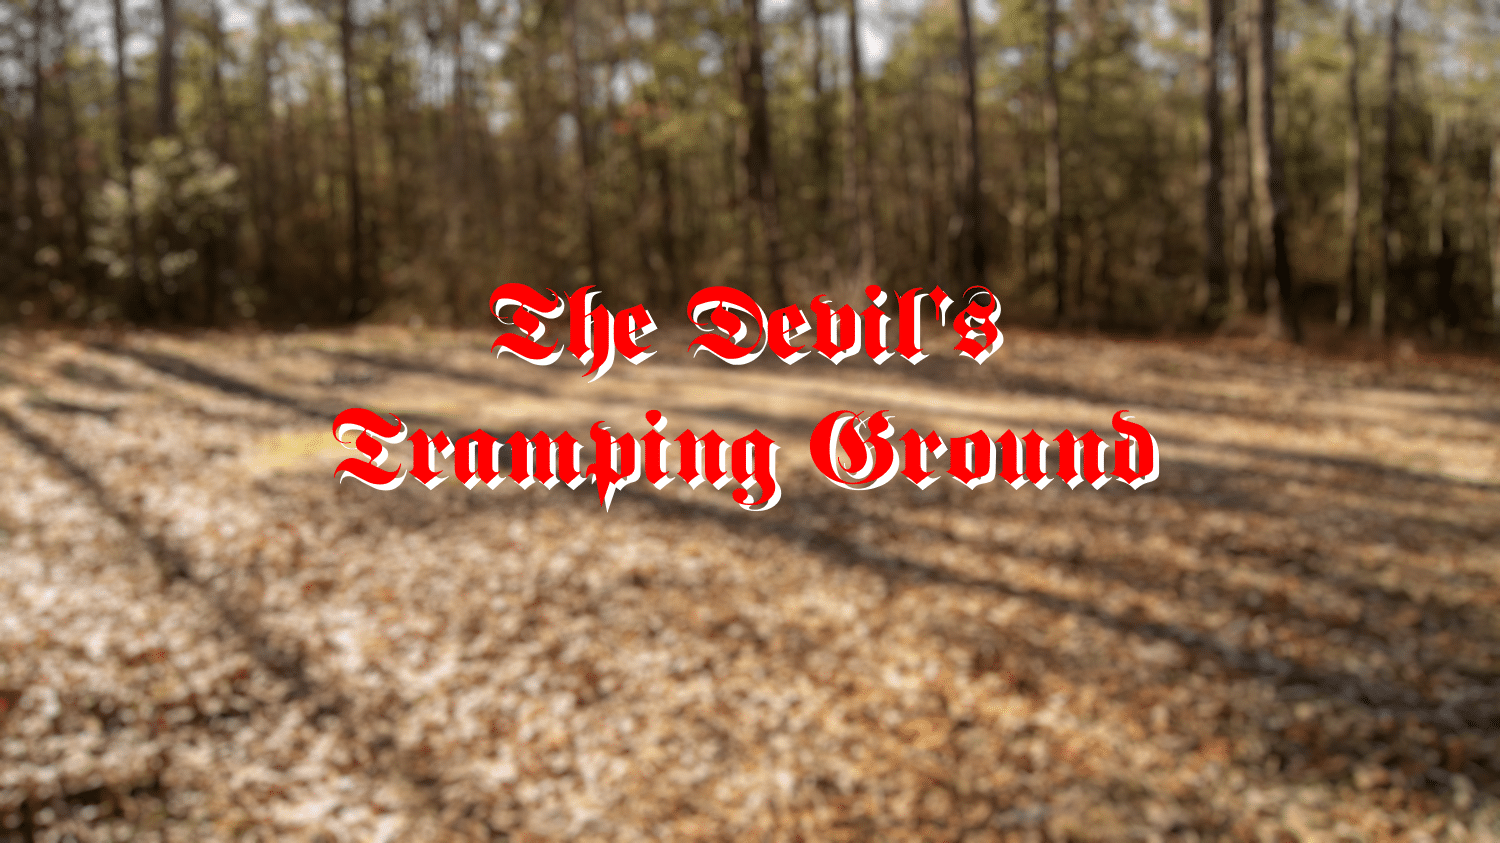 You are currently viewing The Devil’s Tramping Ground: Fact, Fiction, or Footsteps of Evil?